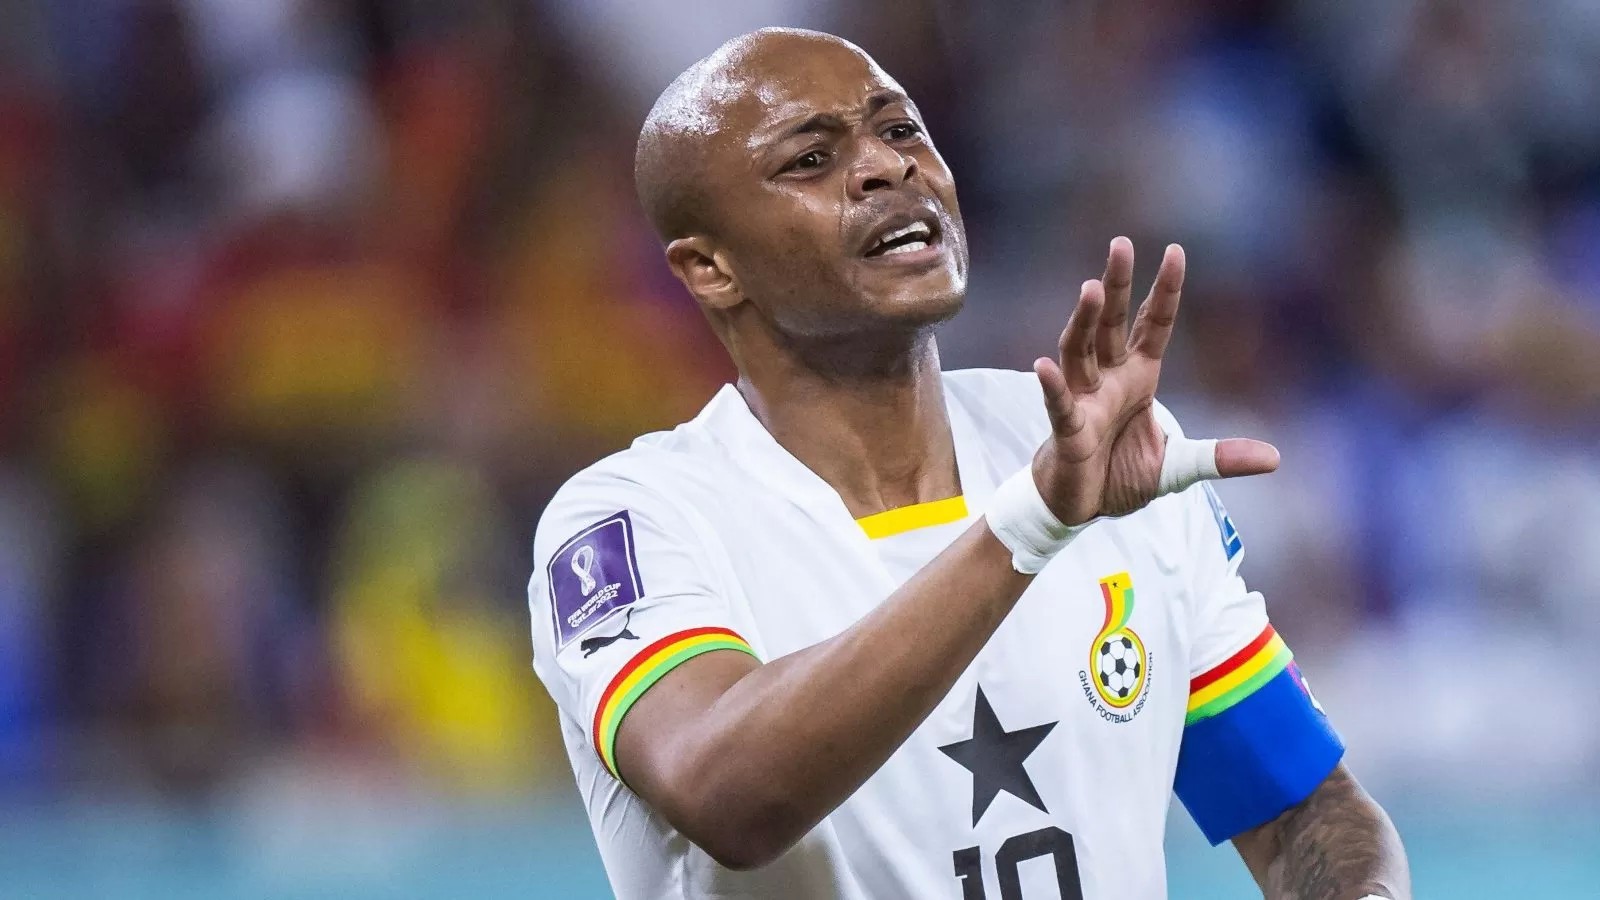 Andre Ayew chooses Nottm Forest over Everton as free transfer is confirmed – ‘it’s a great feeling’